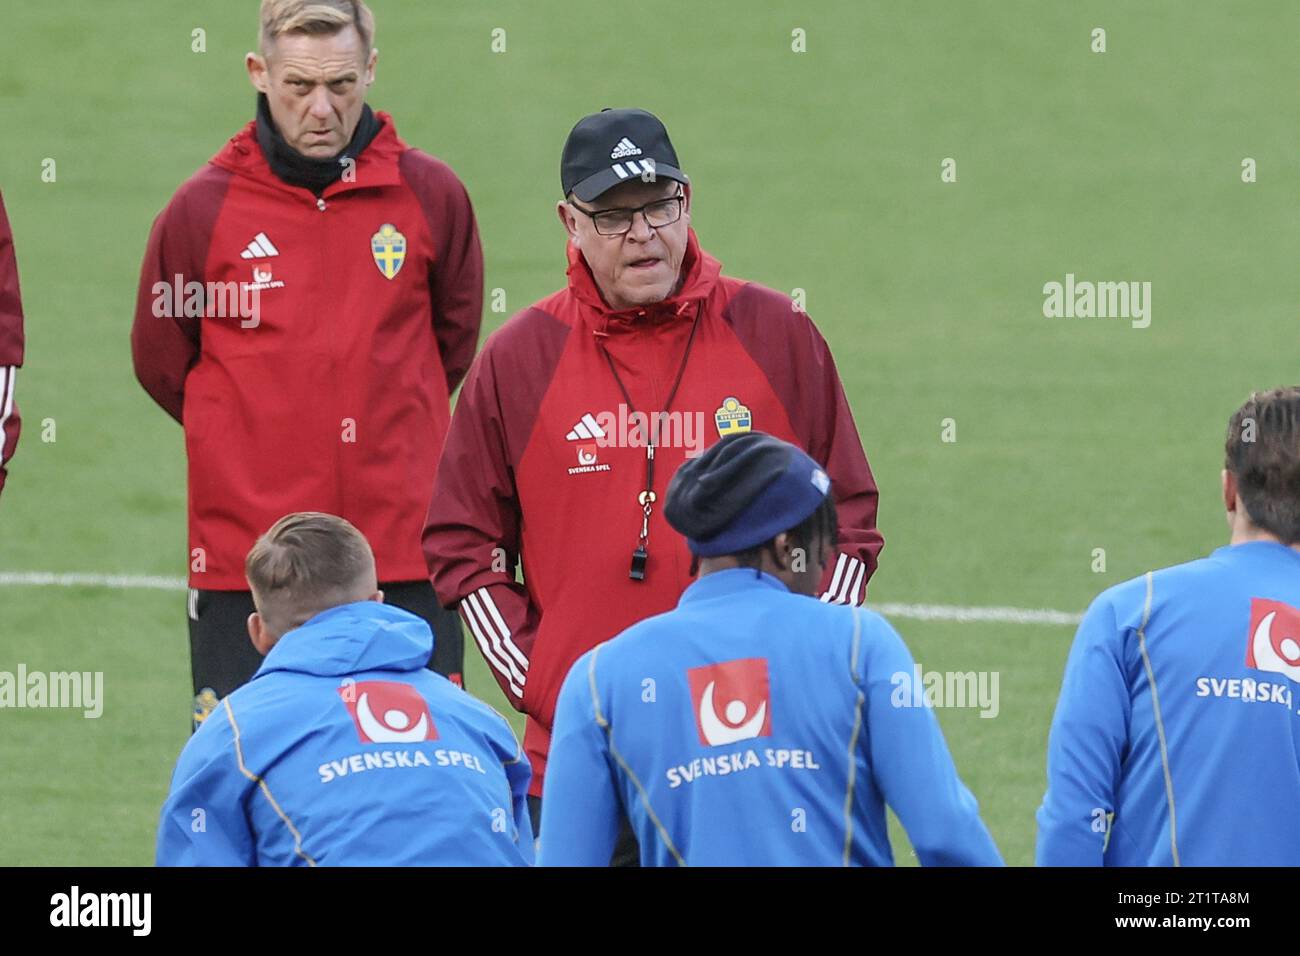 Brussels, Belgium. 15th Oct, 2023. Sweden's head coach Janne Andersson pictured during a training session of the Swedish national soccer team, at the King Baudouin stadium (Stade Roi Baudouin - Koning Boudewijn stadion), Sunday 15 October 2023. The Belgian national soccer team Red Devils are playing against Sweden on Monday, match 7/8 in Group F of the Euro 2024 qualifications. BELGA PHOTO BRUNO FAHY Credit: Belga News Agency/Alamy Live News Stock Photo